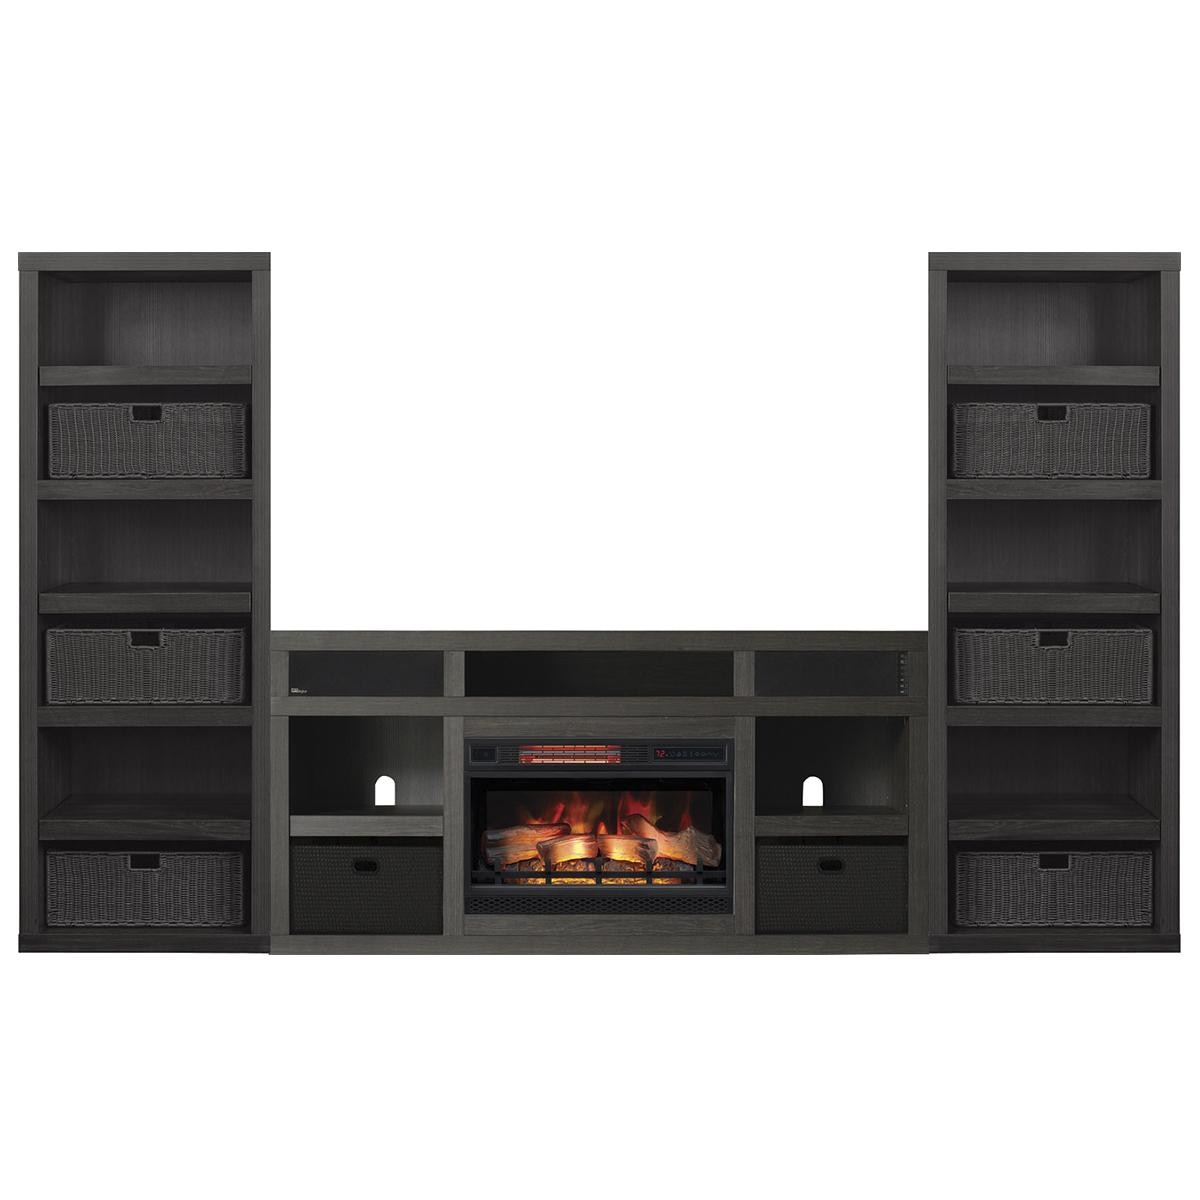 Different Types Of Fireplaces Inspirational Fabio Flames Greatlin 3 Piece Fireplace Entertainment Wall